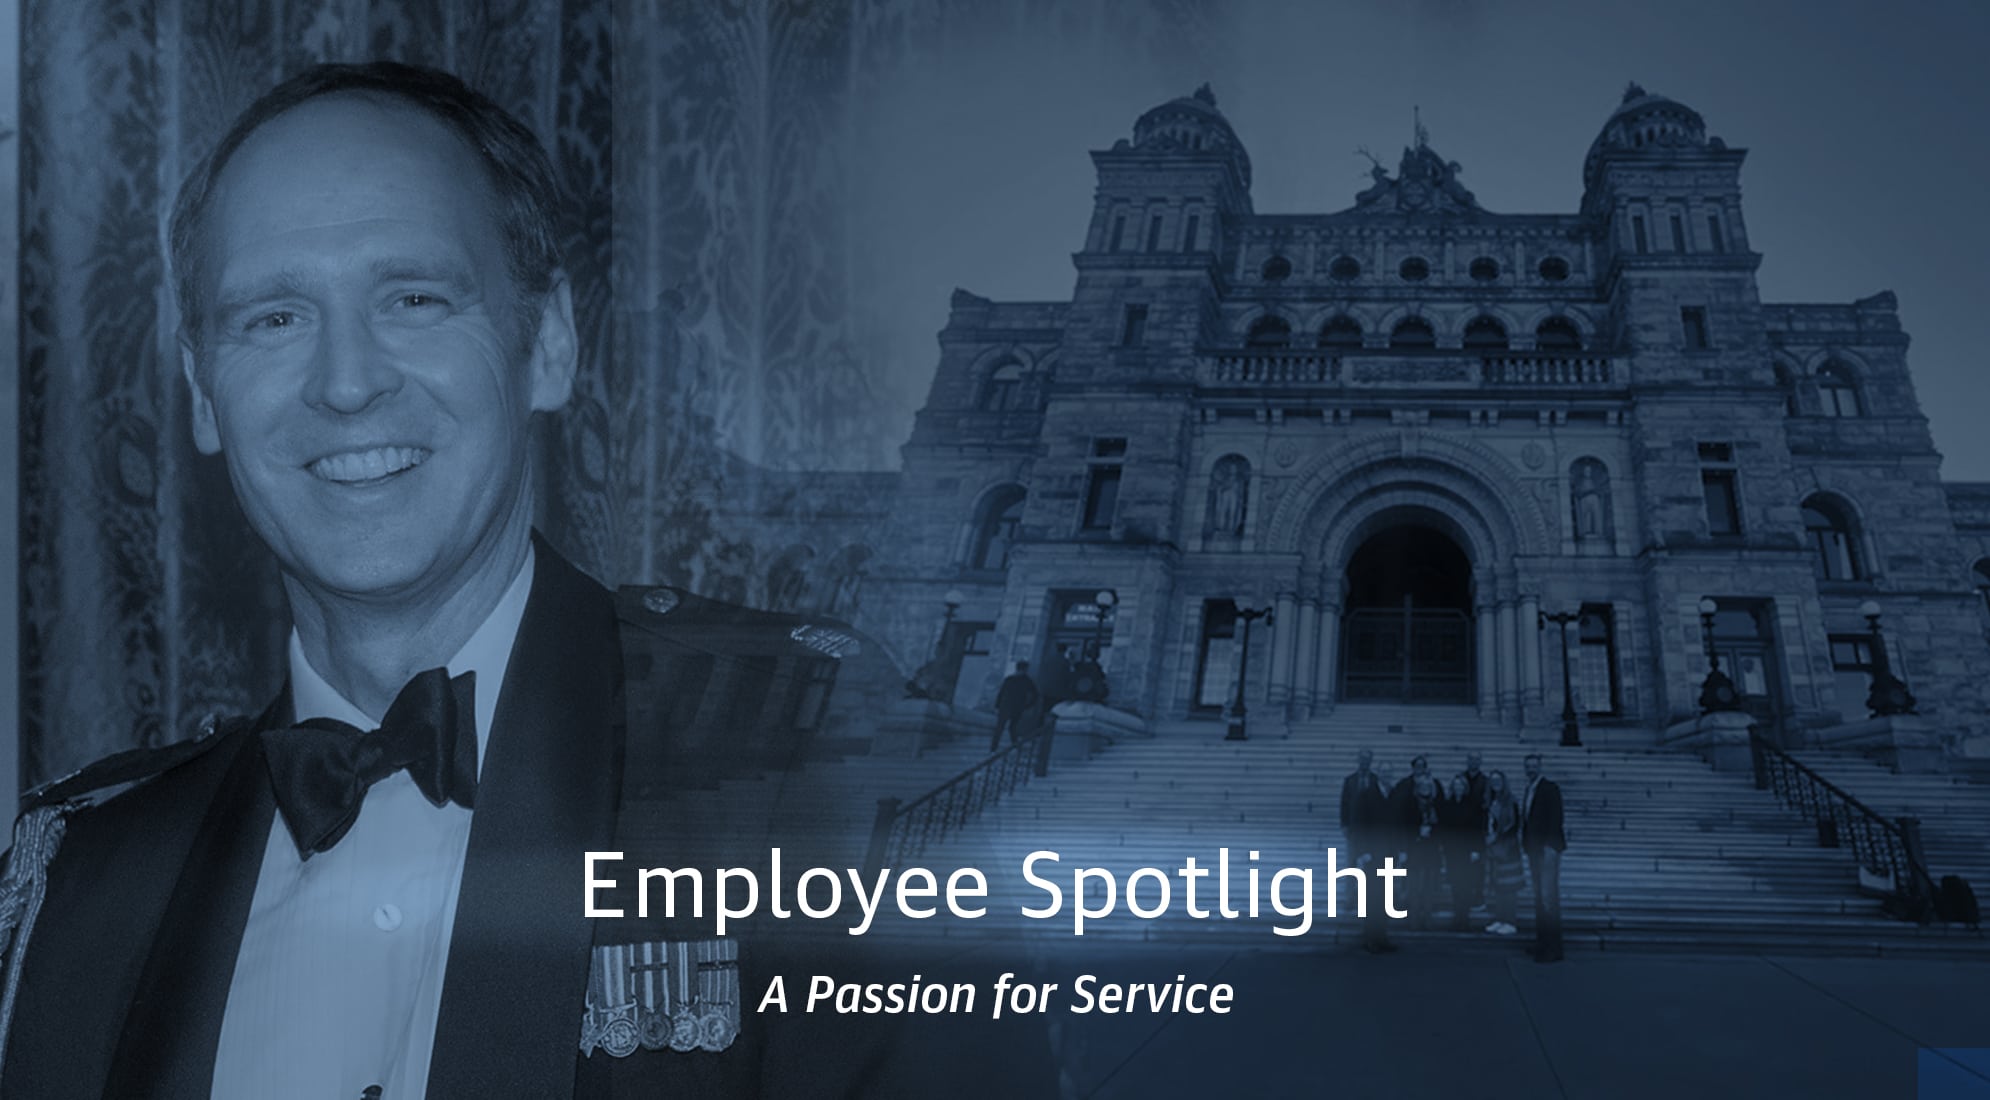 Employee Spotlight: A Passion for Public Service